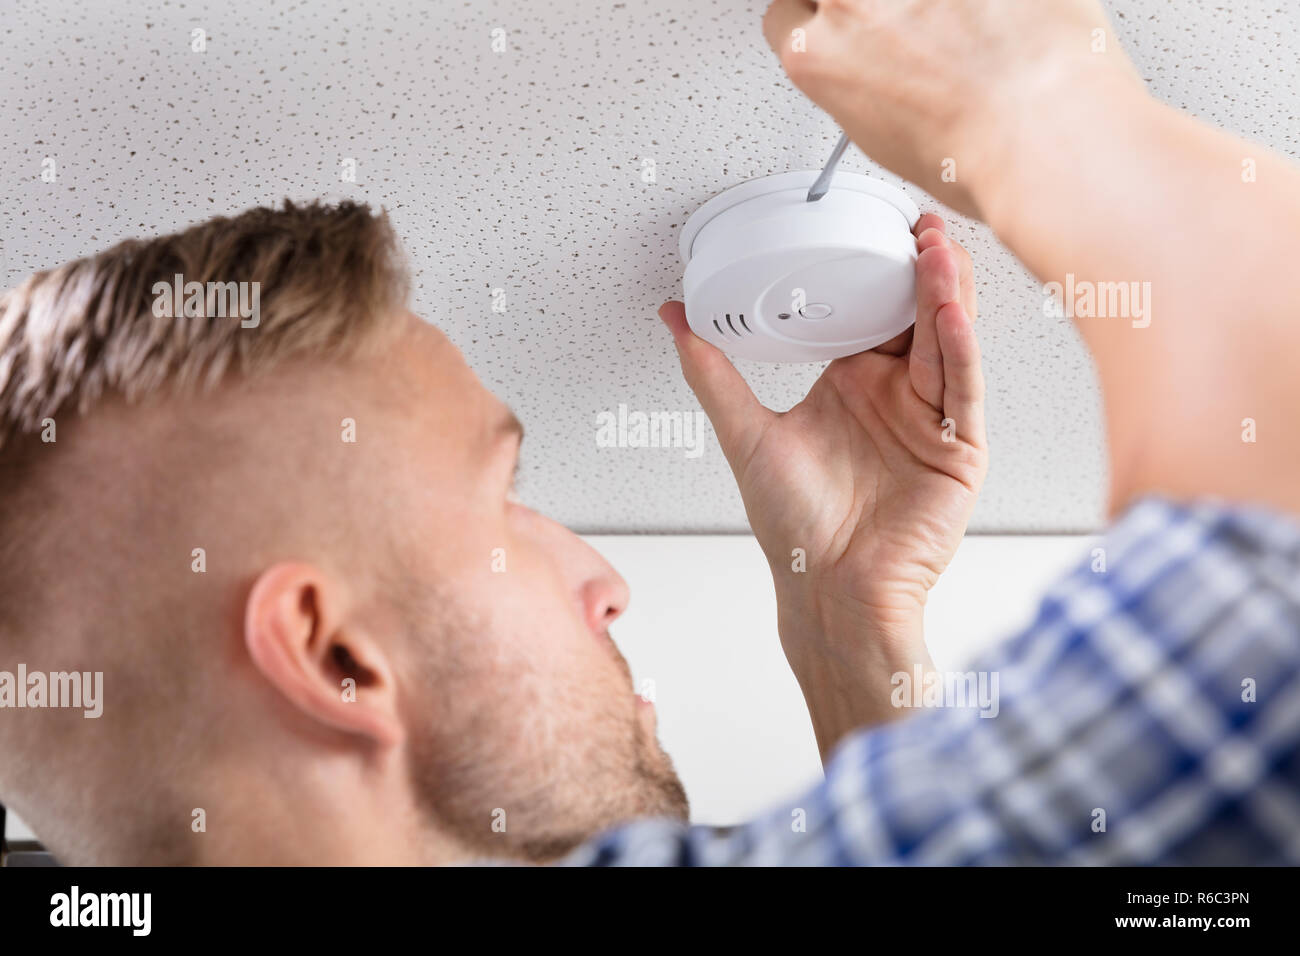 Person's Hand Using Screwdriver To Install Smoke Detector Stock Photo